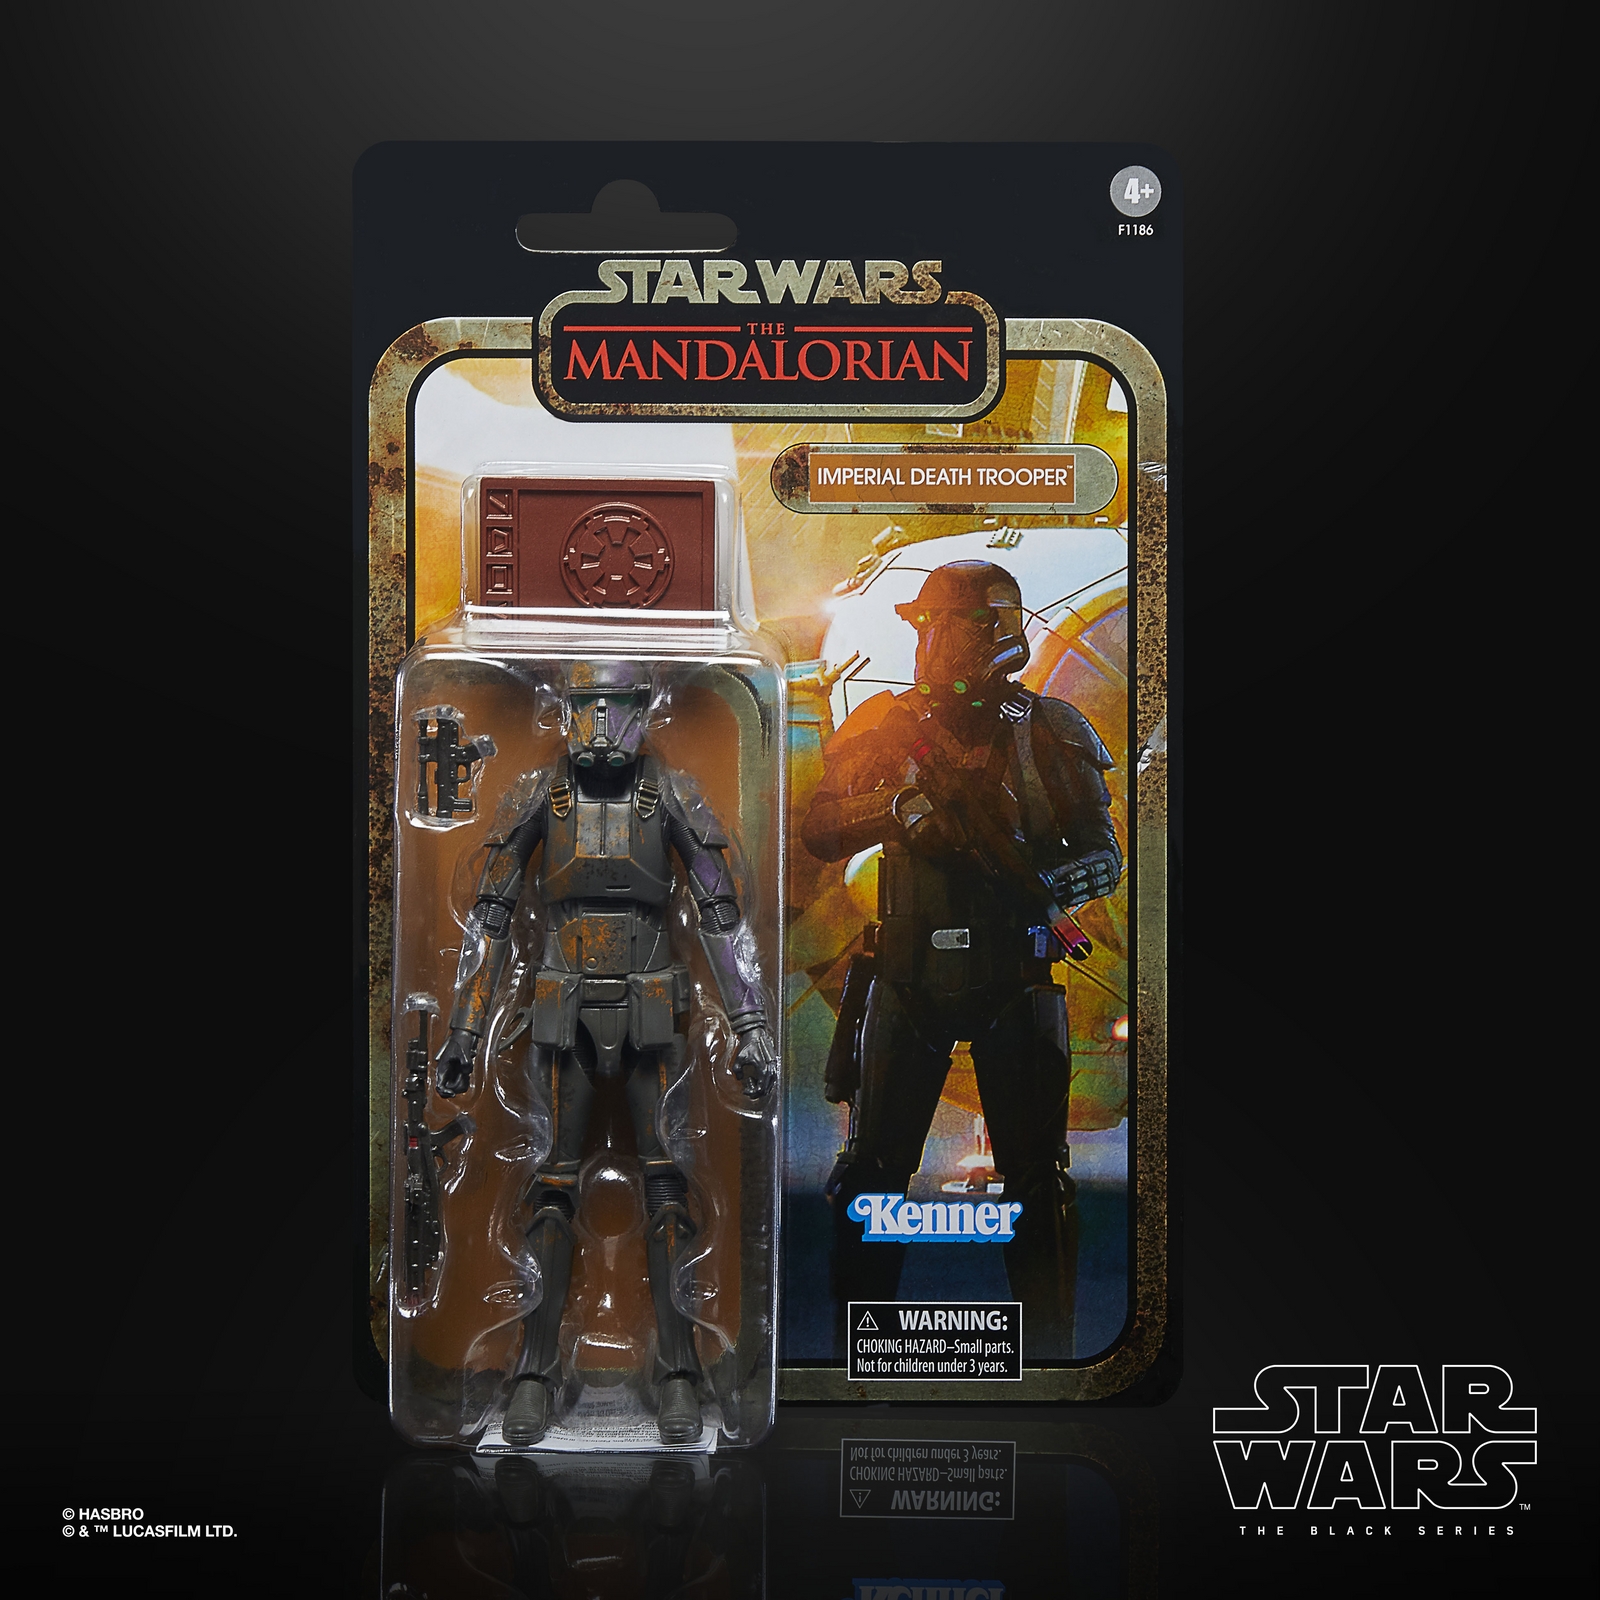 STAR WARS THE BLACK SERIES CREDIT COLLECTION 6-INCH DEATH TROOPER Figure - in pck.jpg